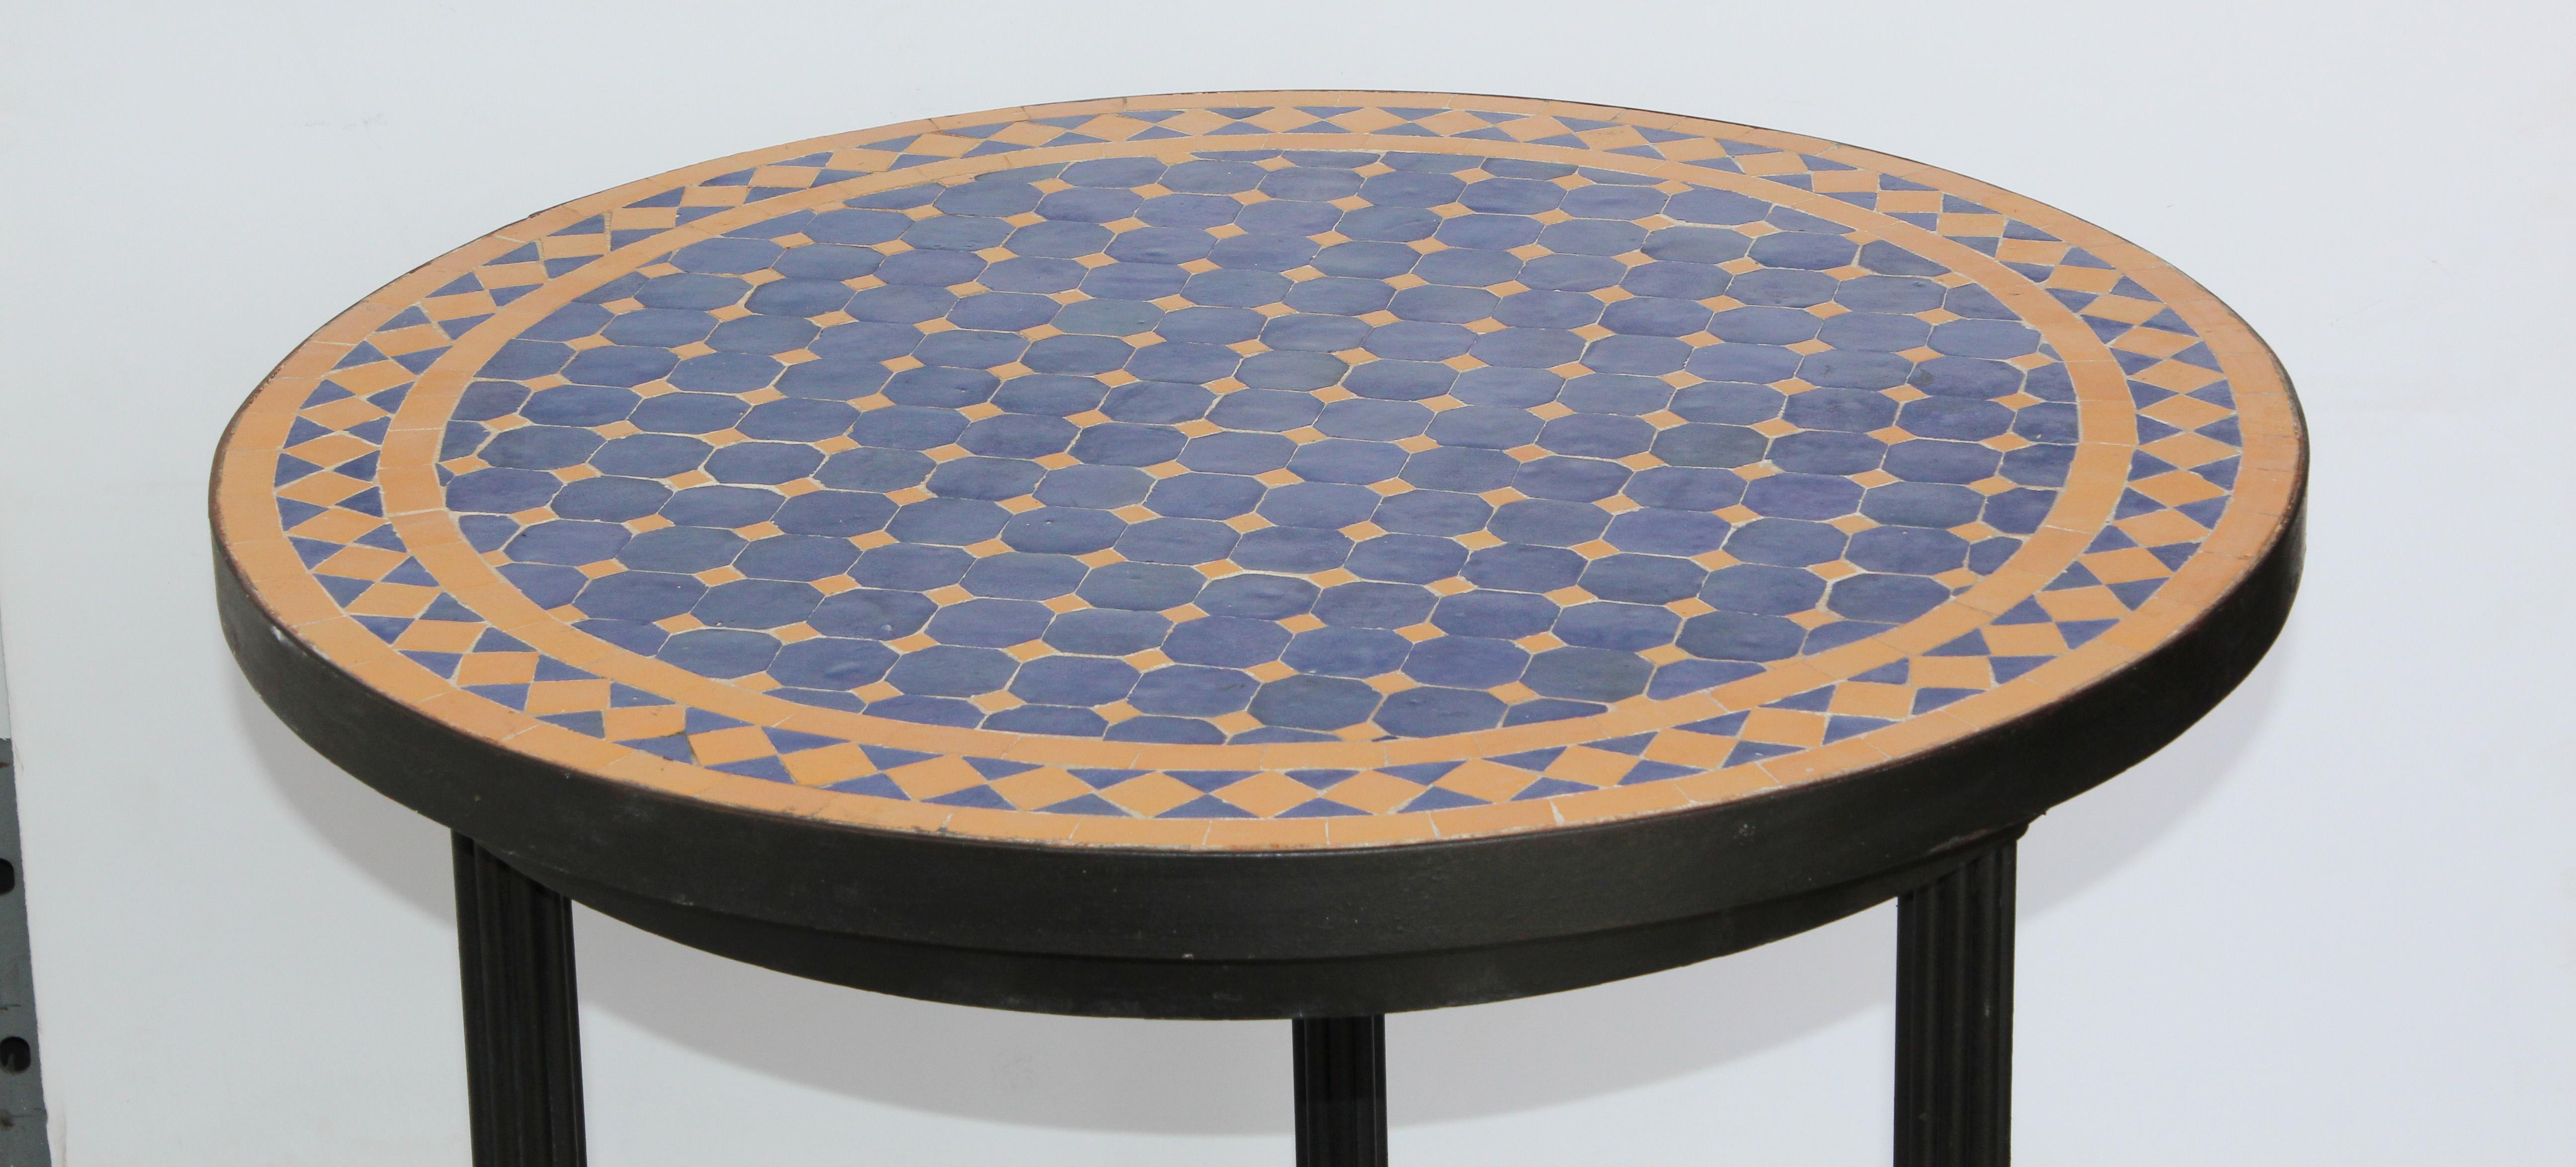 Moroccan mosaic tiles side table on iron base.
Handmade by expert artisans in Fez, Morocco using reclaimed old glazed cobalt blue and yellow colors tiles inlaid in concrete using reclaimed old glazed tiles and making beautiful geometrical designs,